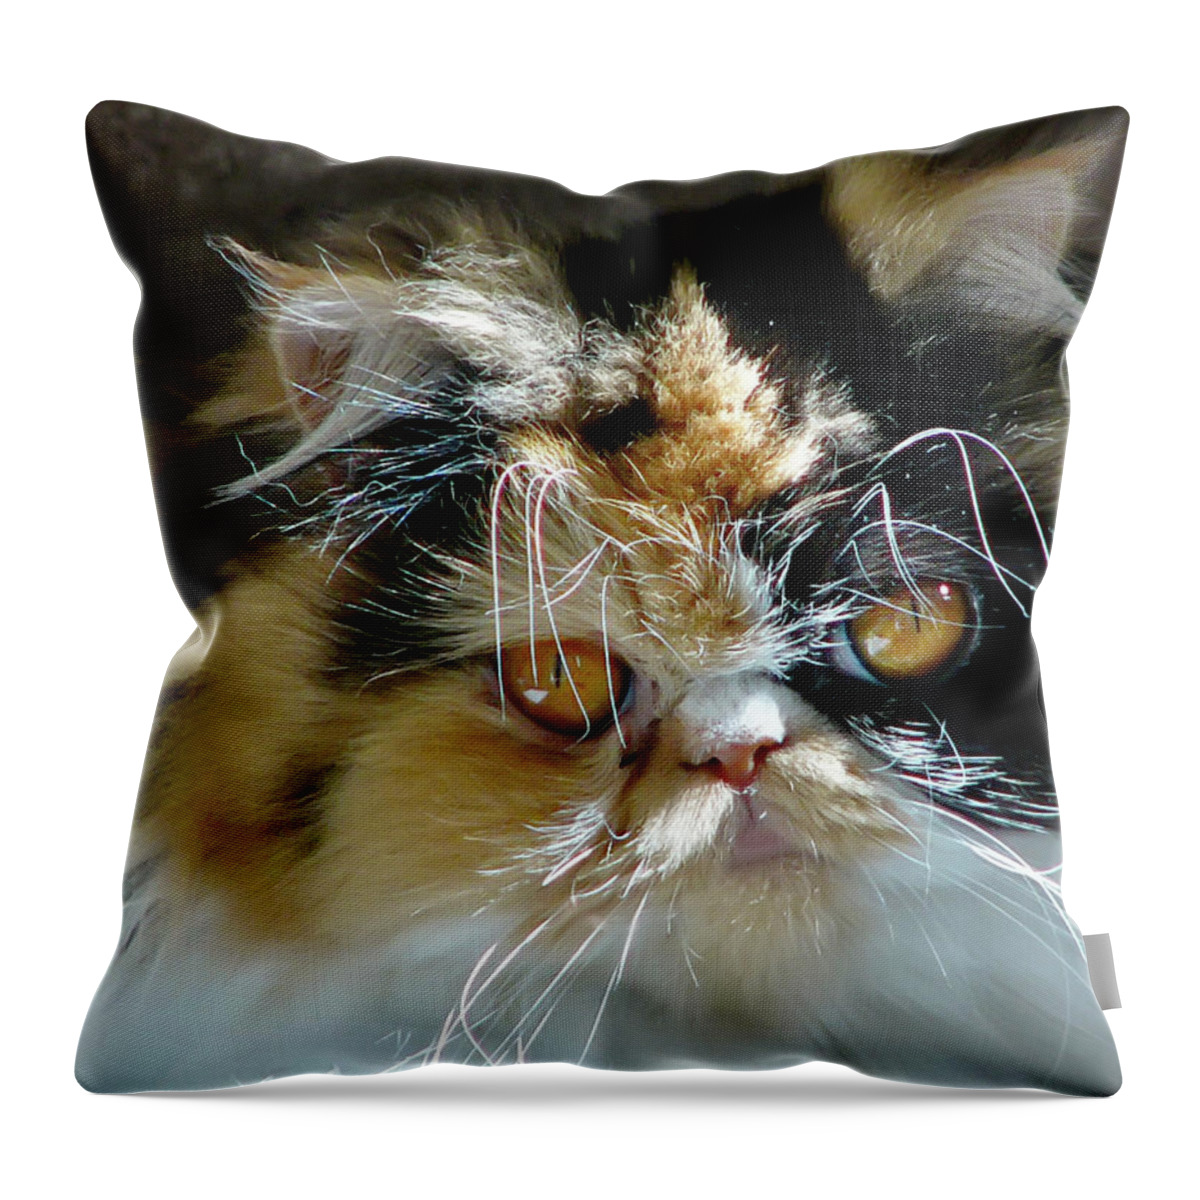 Animals Throw Pillow featuring the photograph Cali Cat by Rhonda McDougall